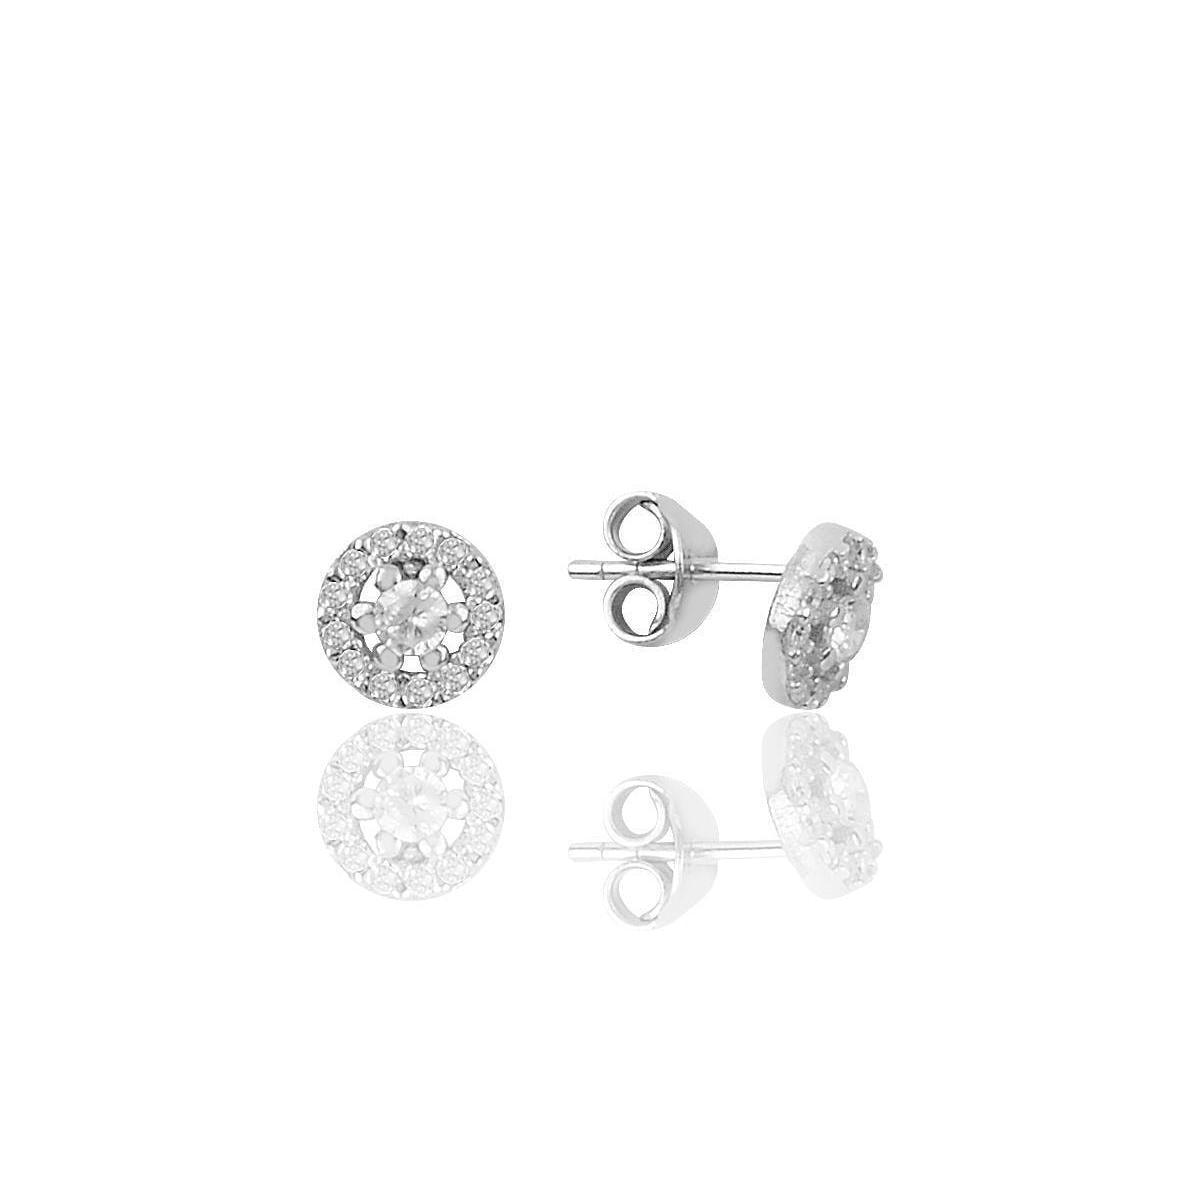 Solitaire Diamond Stud Earrings • Bridesmaid Gifts For Wedding Day - Trending Silver Gifts